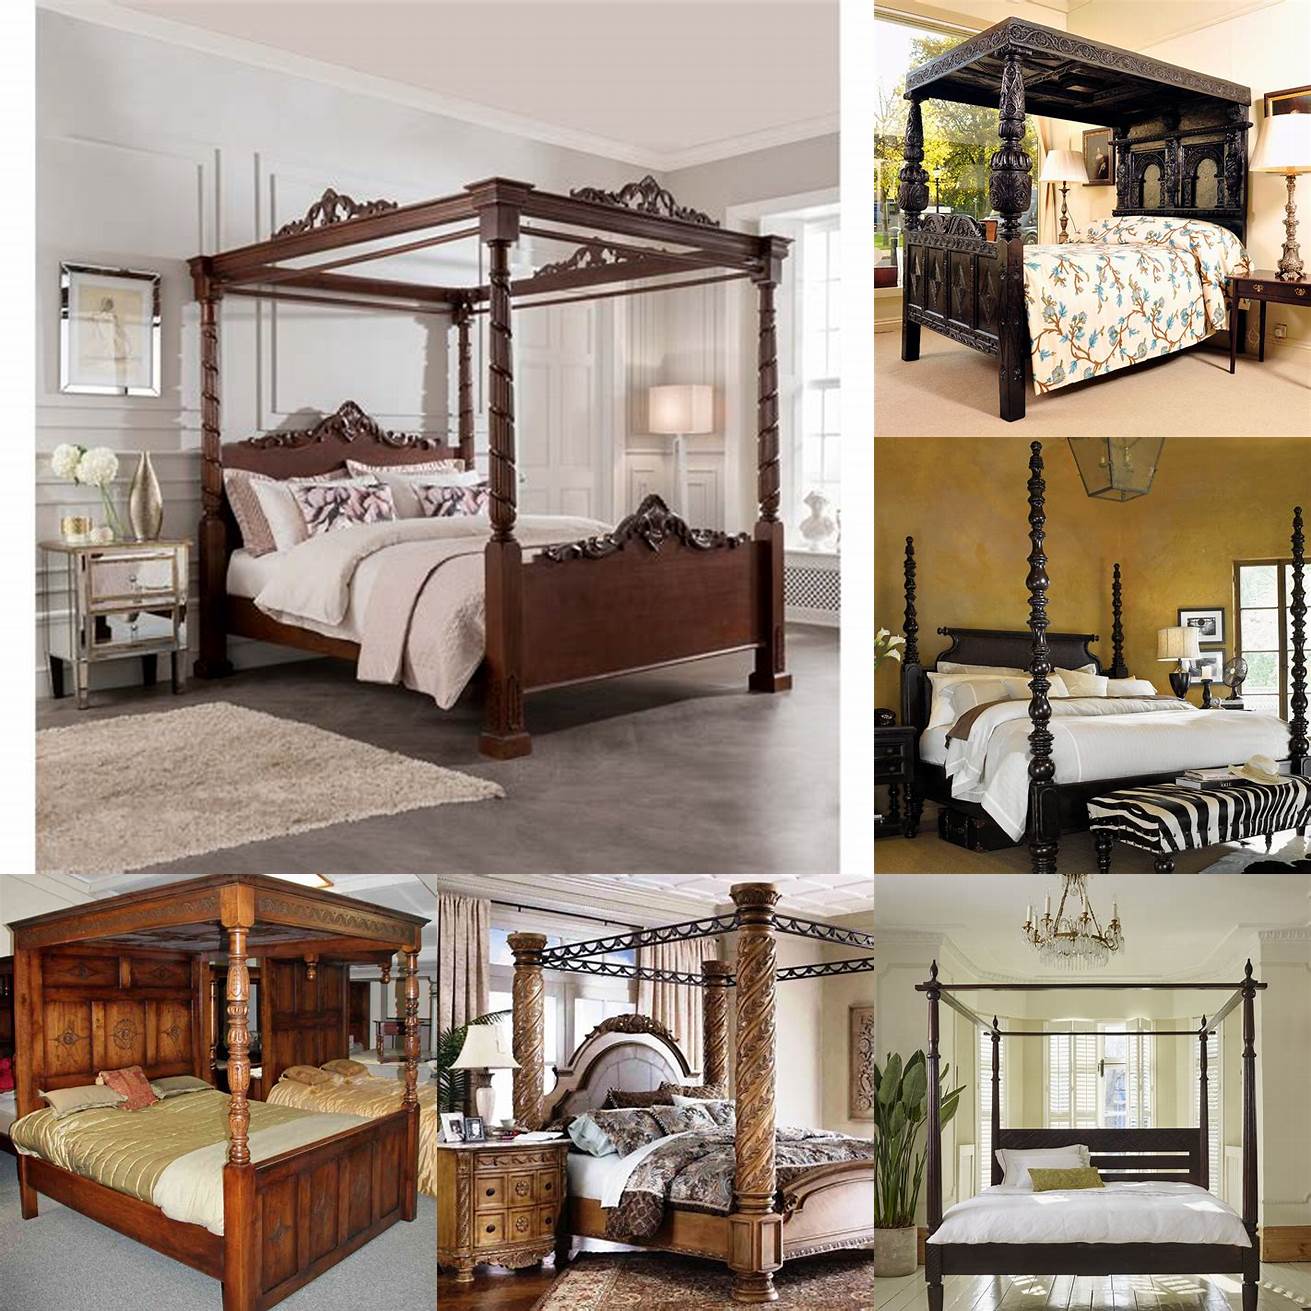 Four-poster beds